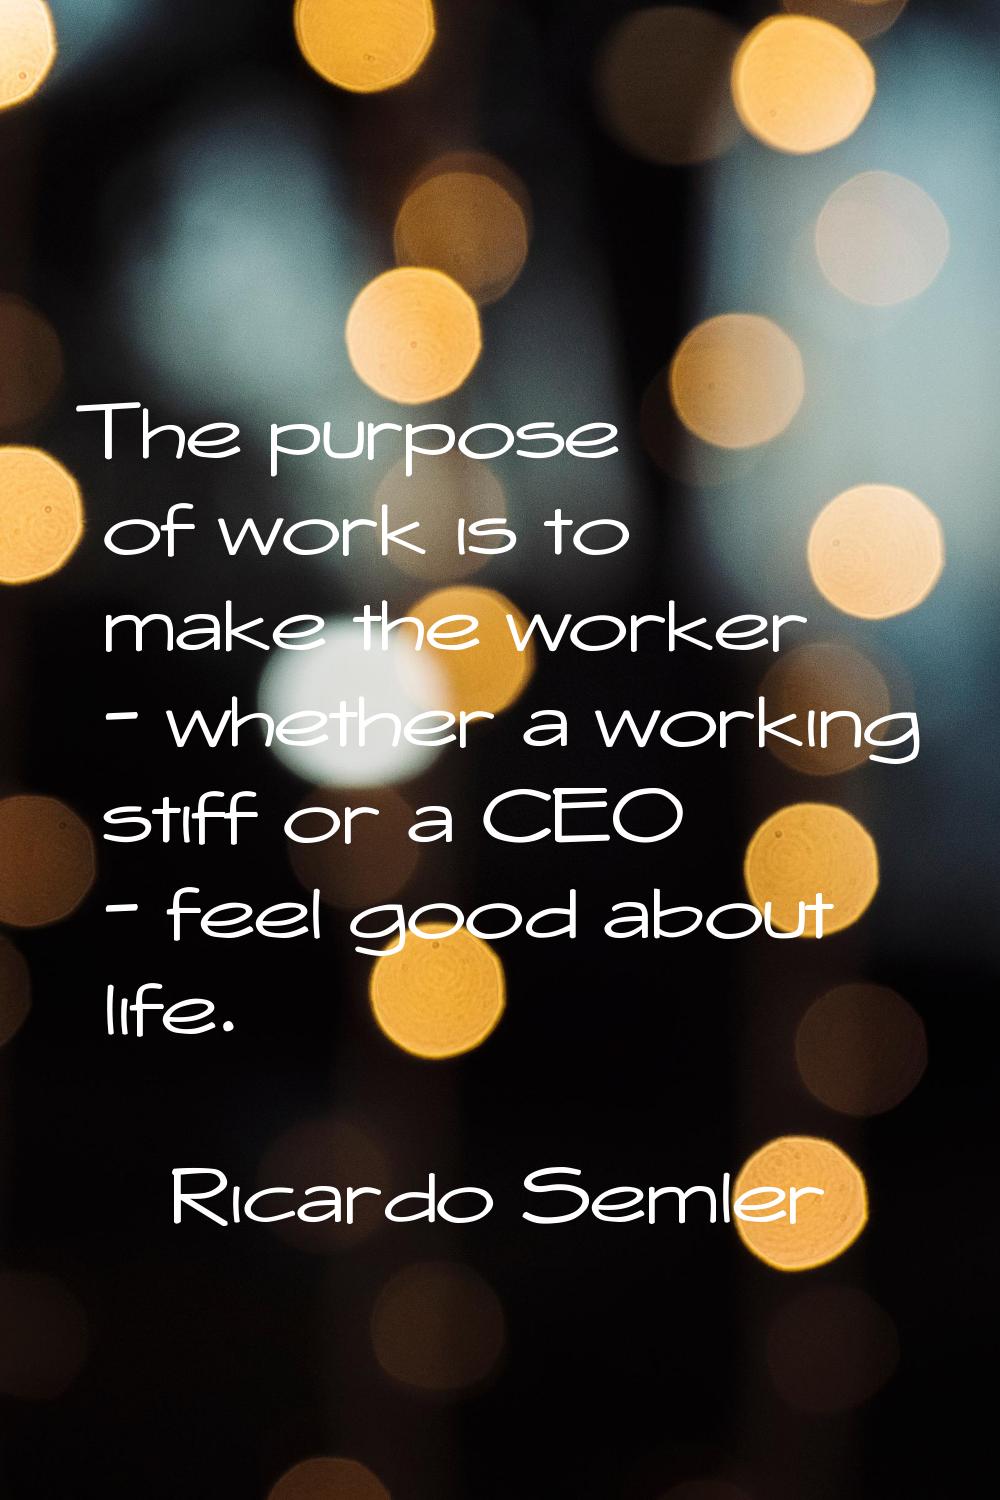 The purpose of work is to make the worker - whether a working stiff or a CEO - feel good about life